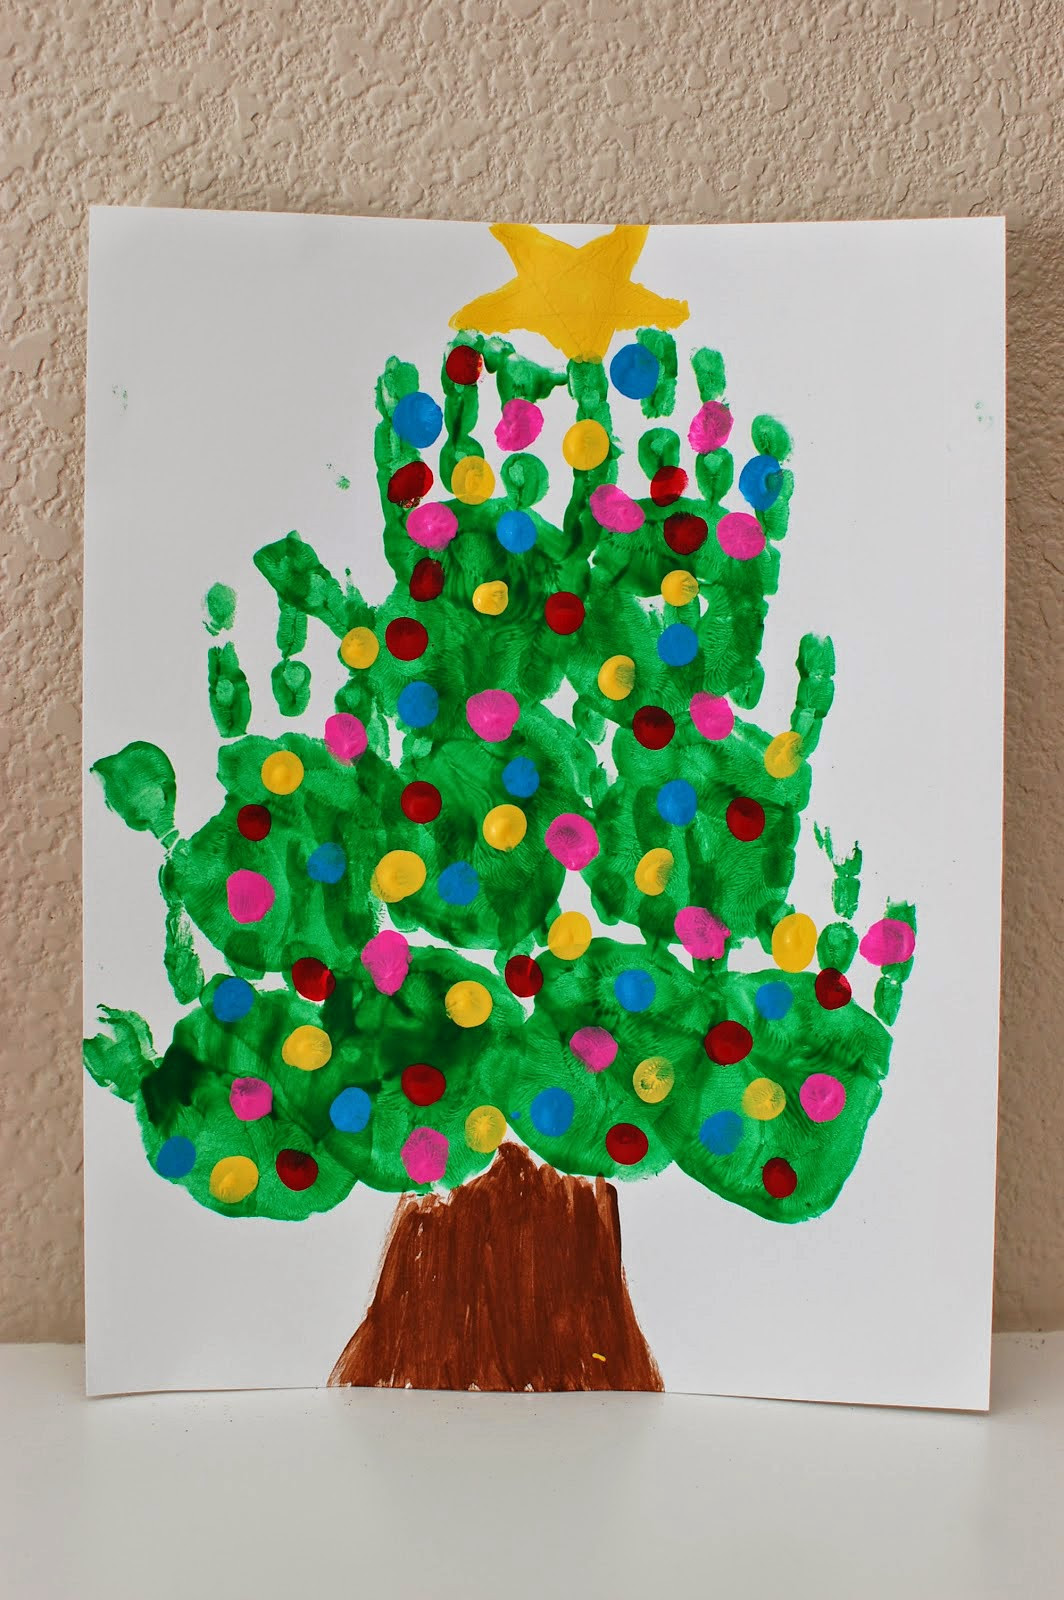 Child Christmas Craft Ideas
 20 of the Cutest Christmas Handprint Crafts for Kids